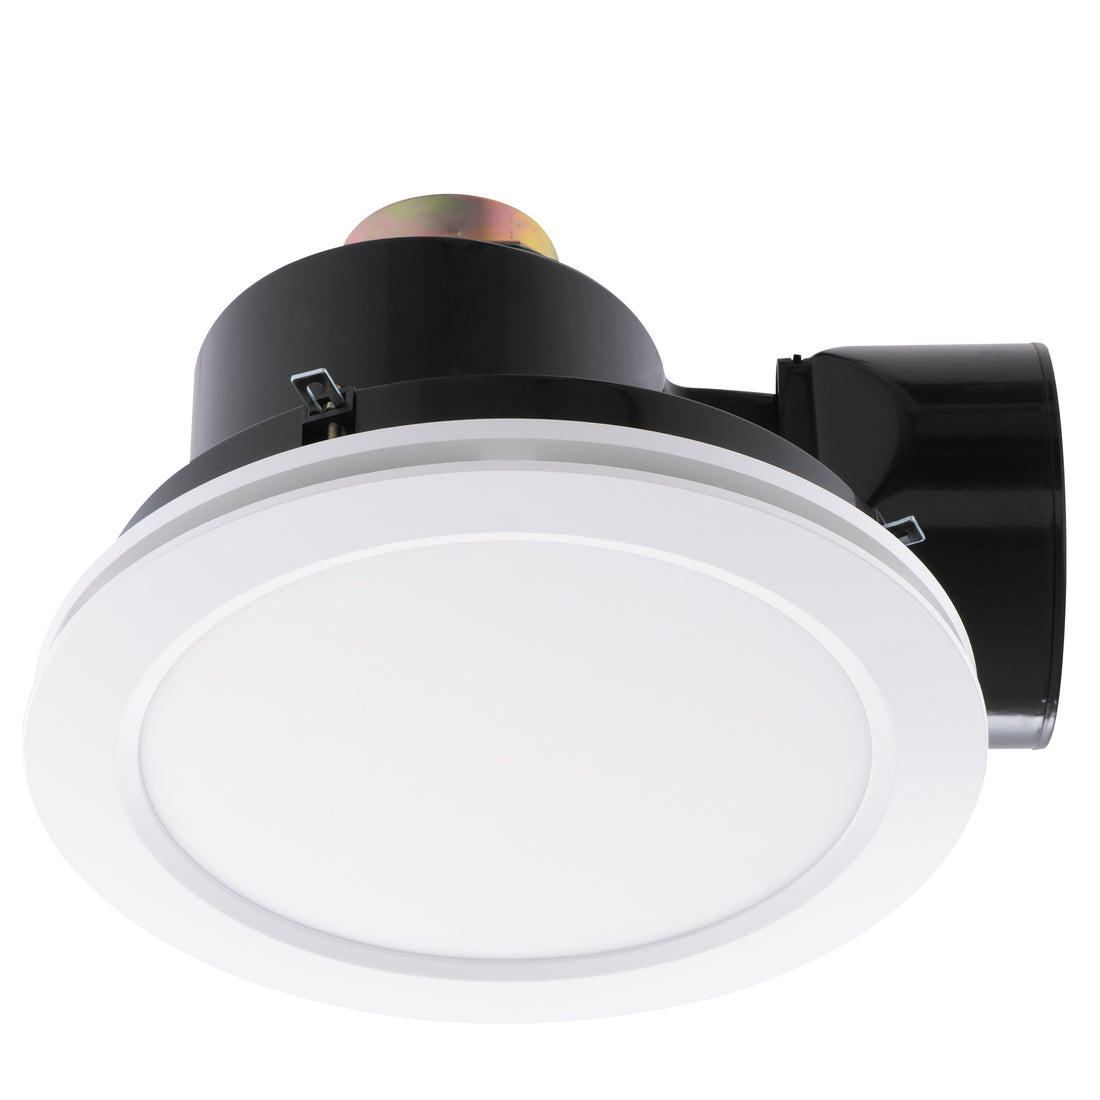 Revoline White Large Bathroom Exhaust Fan with Tri-Colour Light